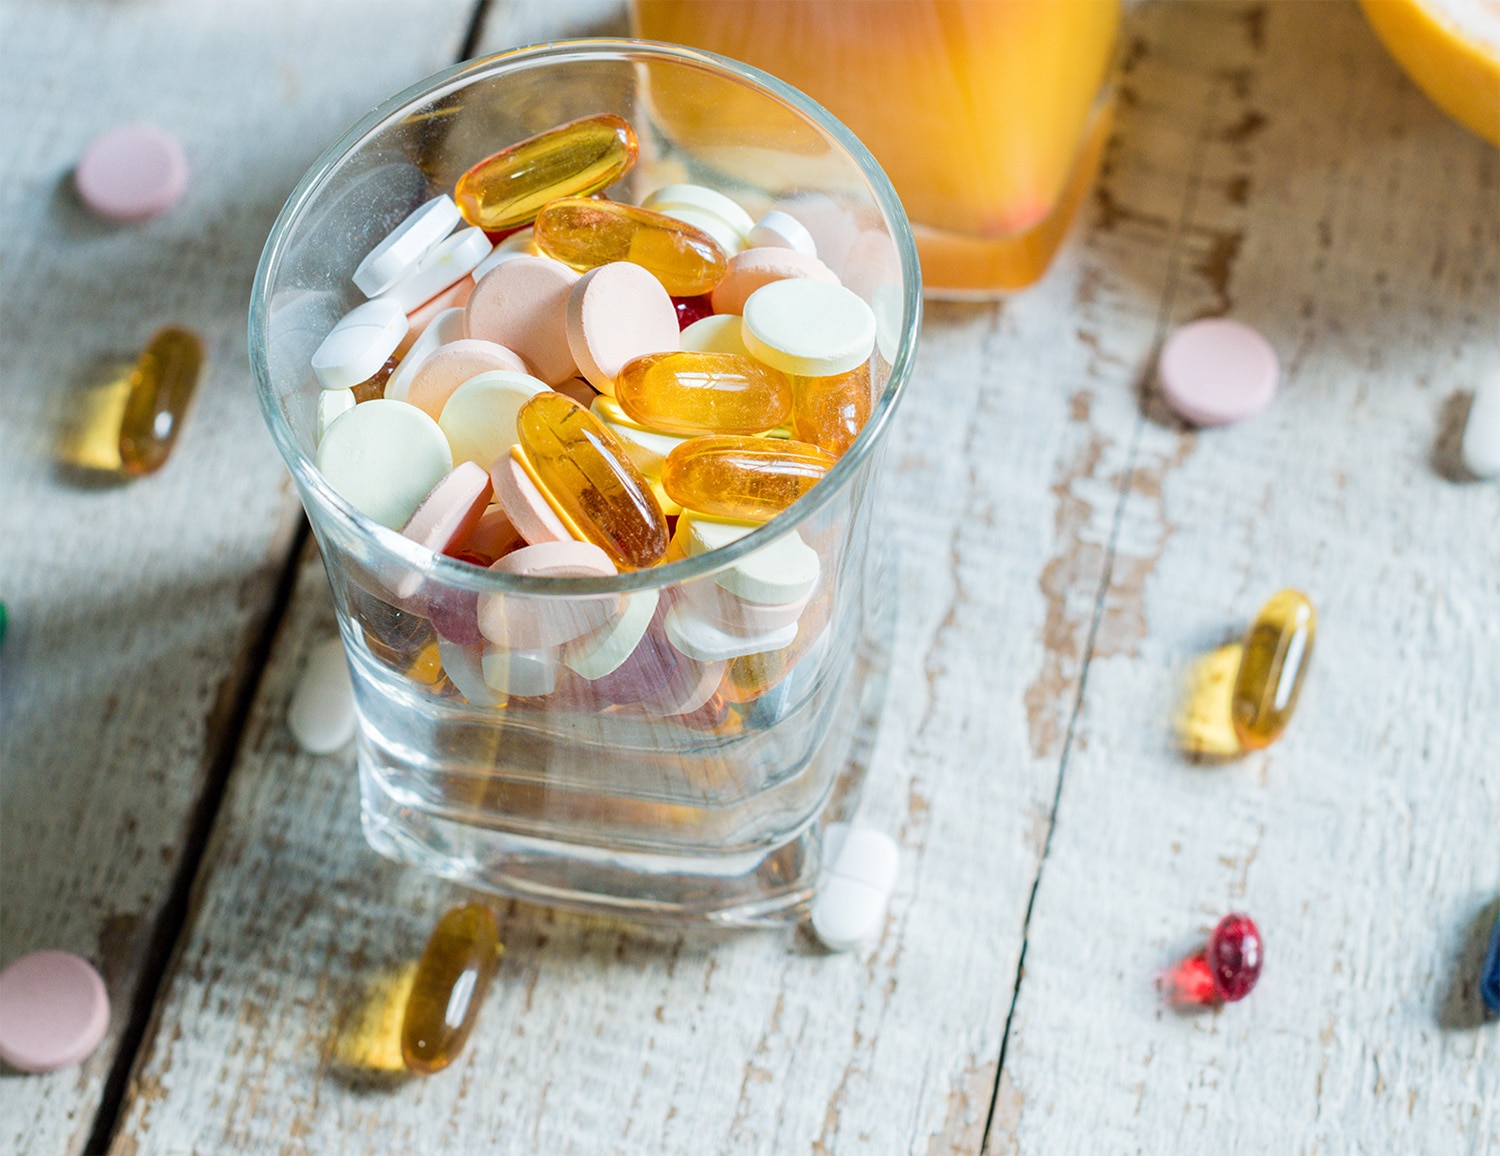 Cancer Treatments and Antioxidant Supplements Can Be a Bad Mix